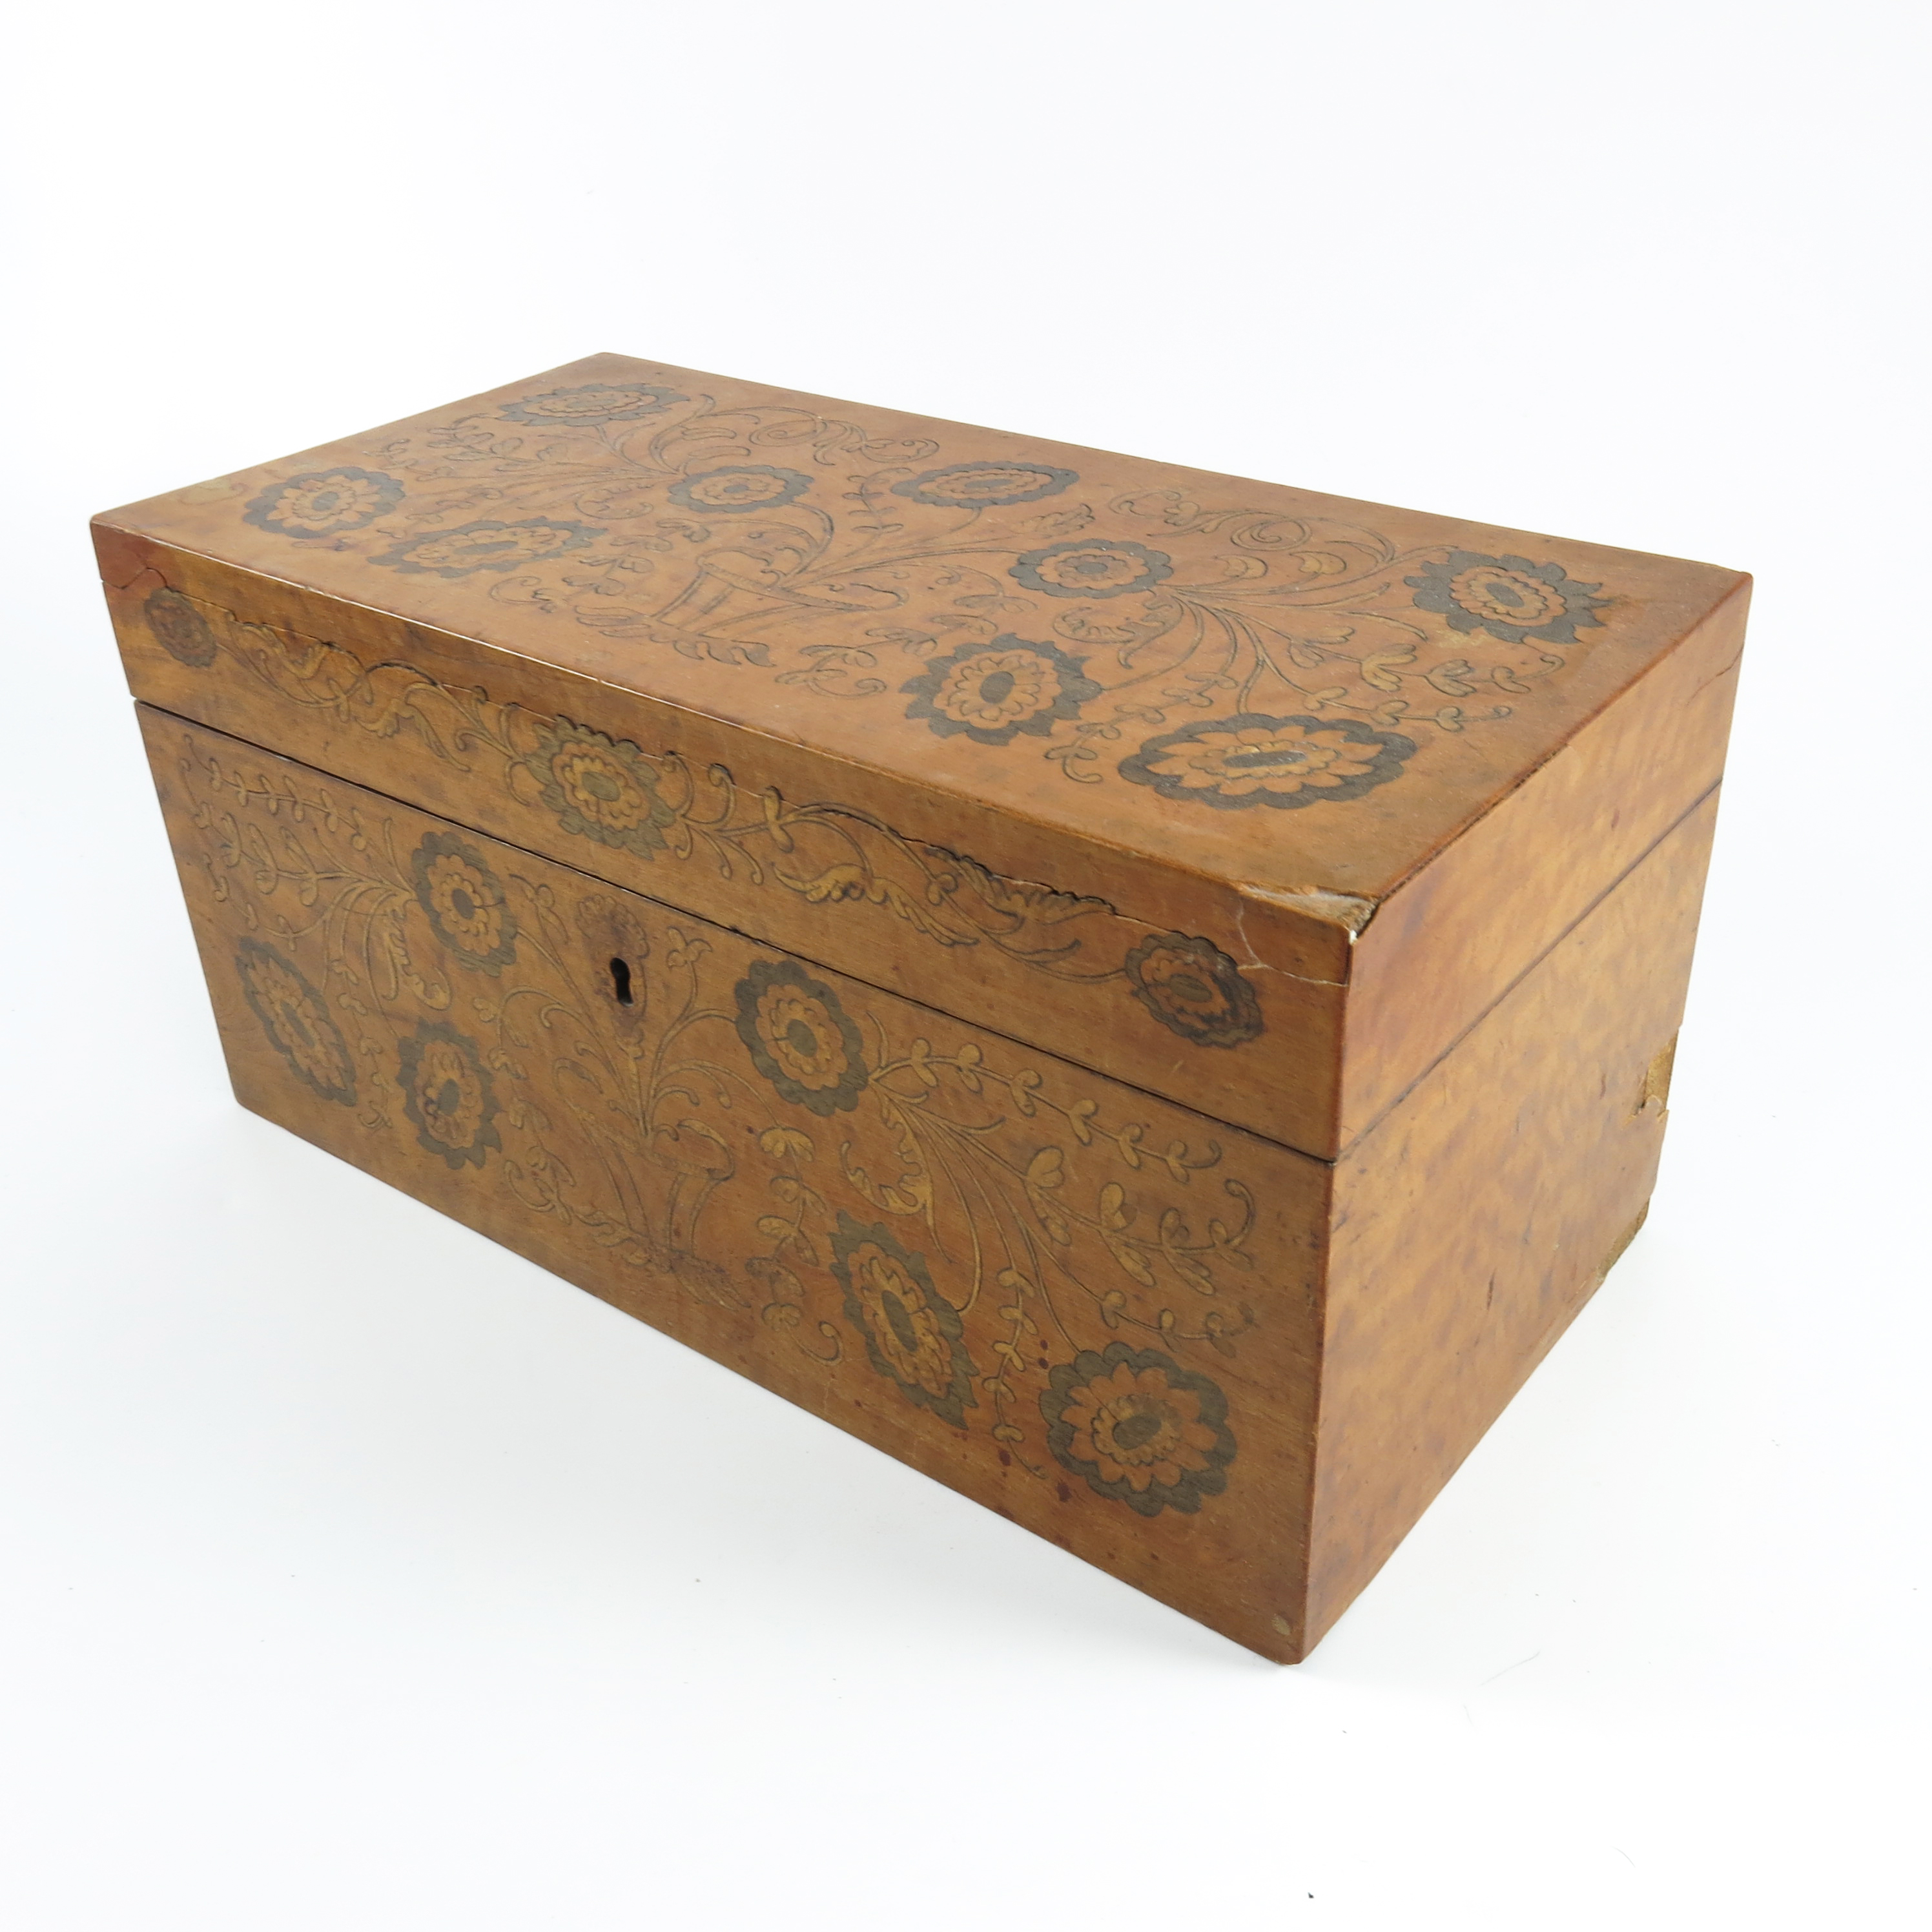 TEA CADDY WITH FLORAL POKER WORK DECORATION AND FITTED INTERIOR - Image 3 of 8